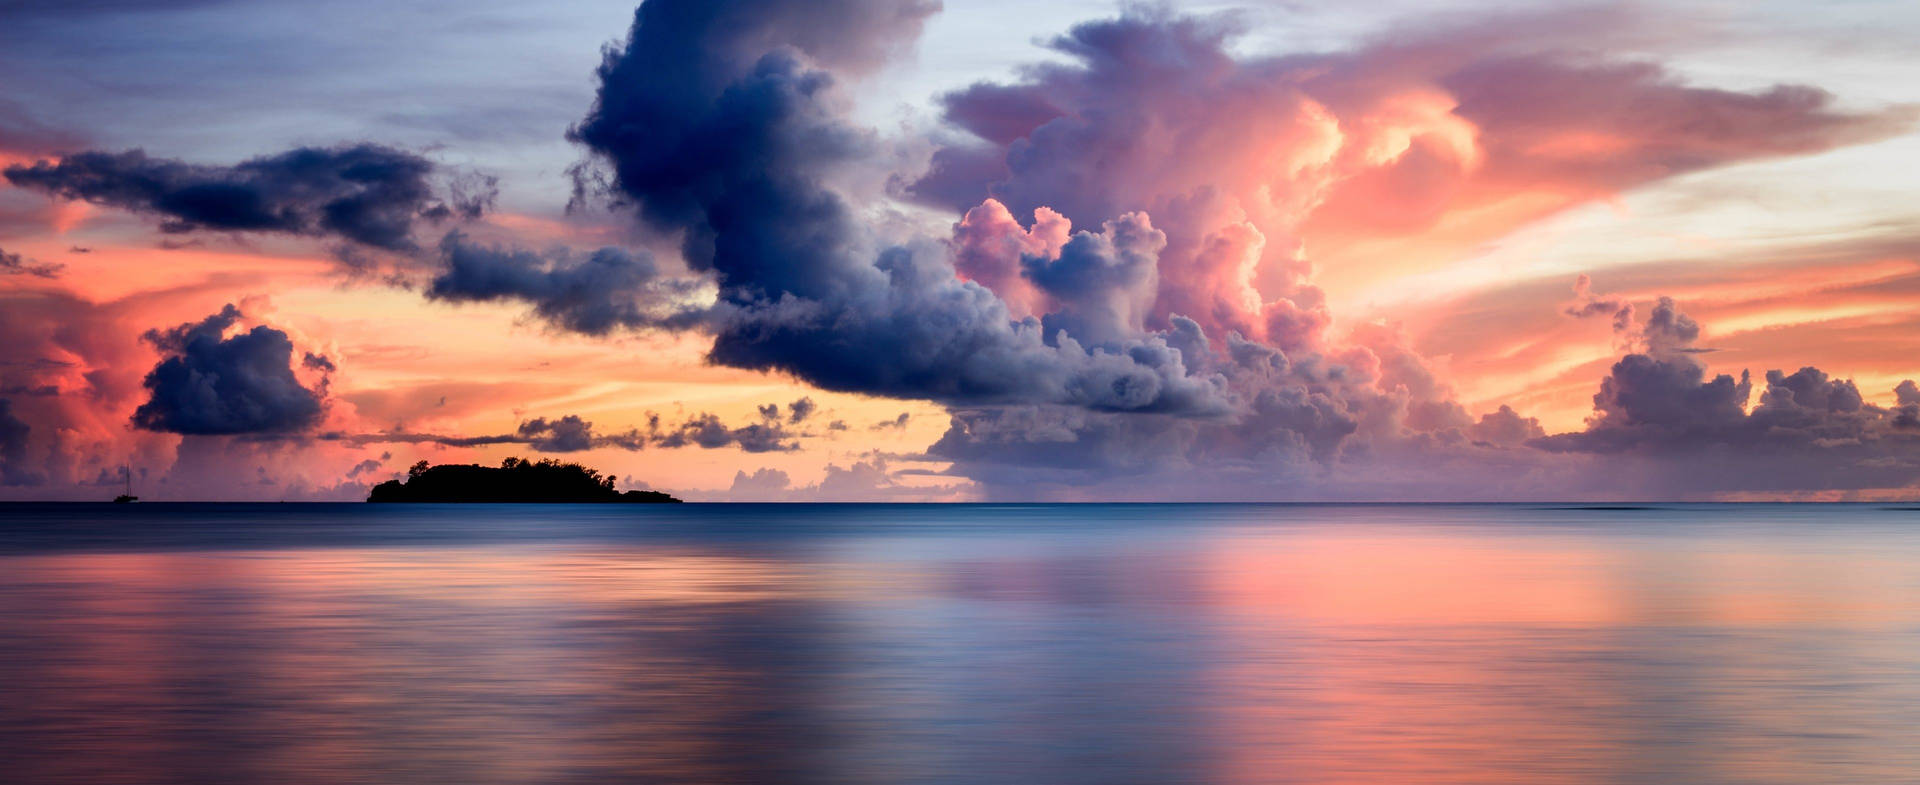 3840x1600 Cloudy Sunset On The Sea Wallpaper